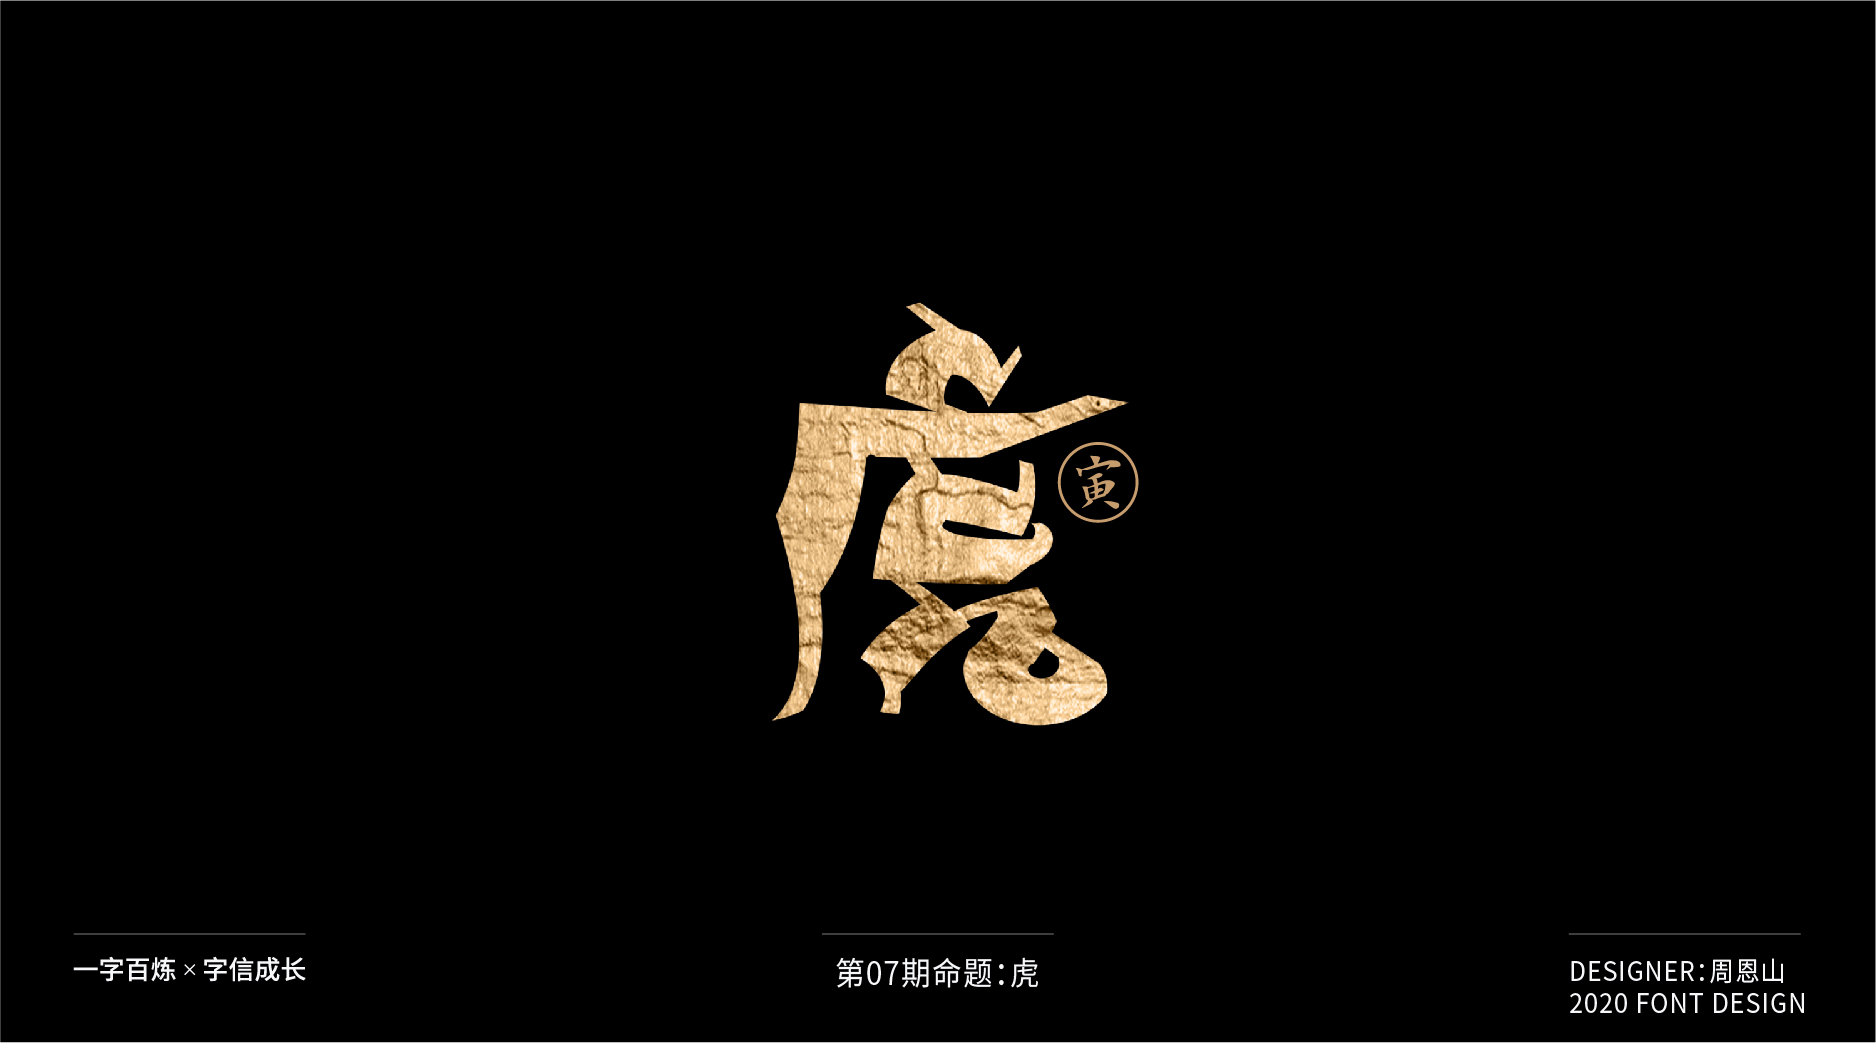 Interesting Chinese Creative Font Design-Tiger: 100 words (100 groups)